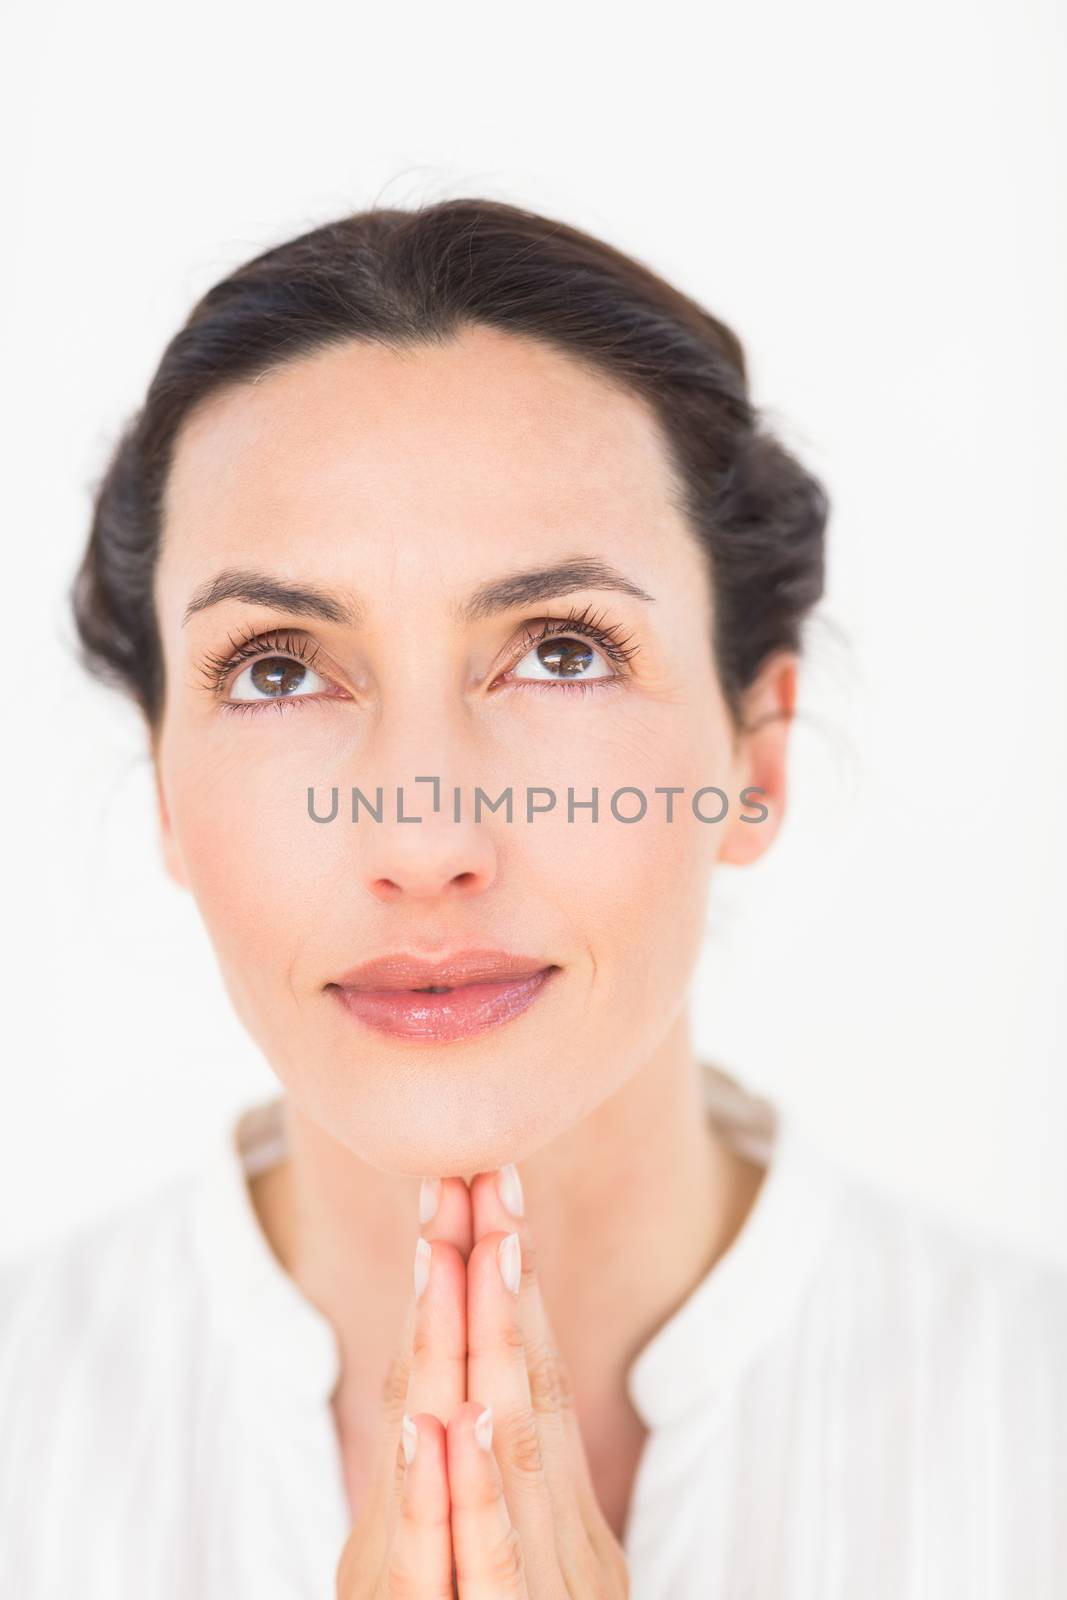 a woman in a meditation position against a white background